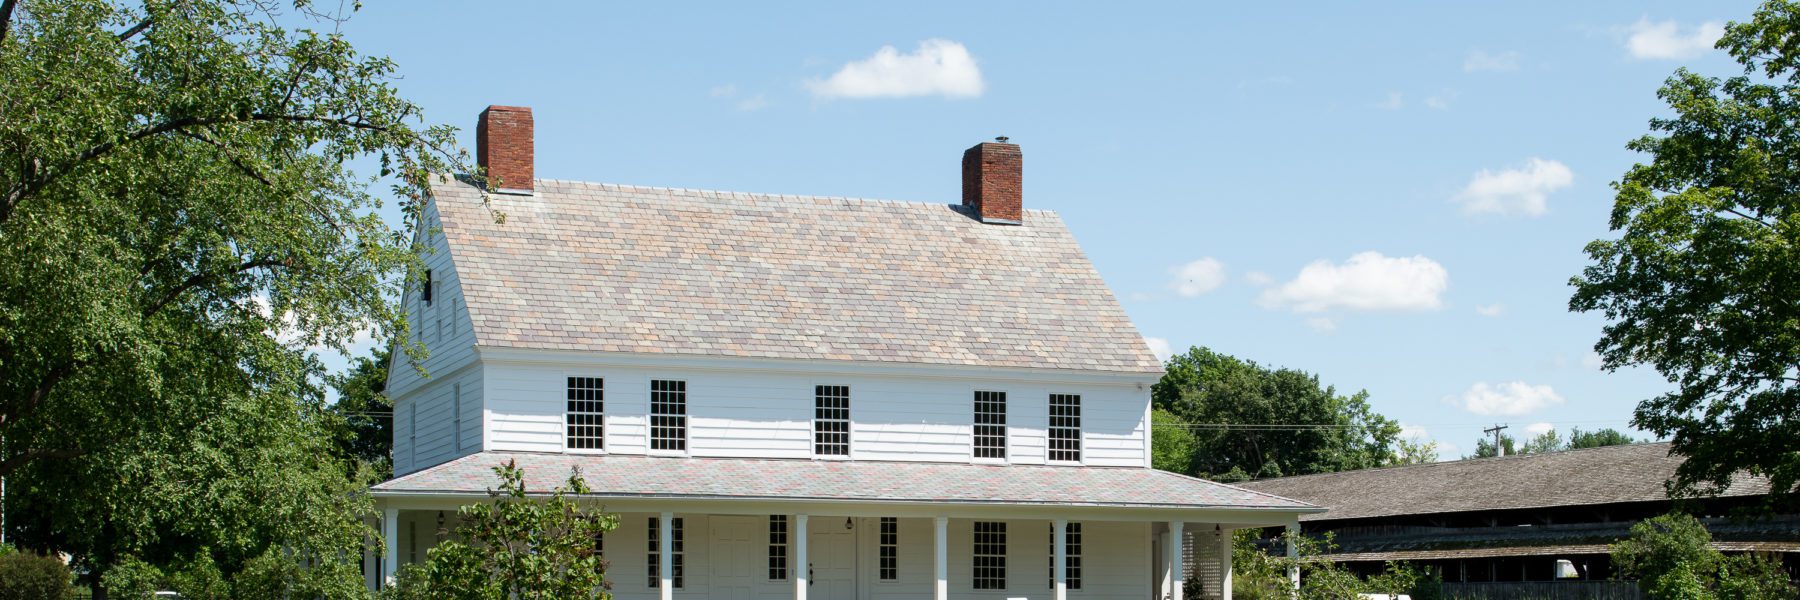 Shelburne Museum Reopens Stagecoach Inn in September! Iconic Folk Art Gallery Received Extensive Renovation